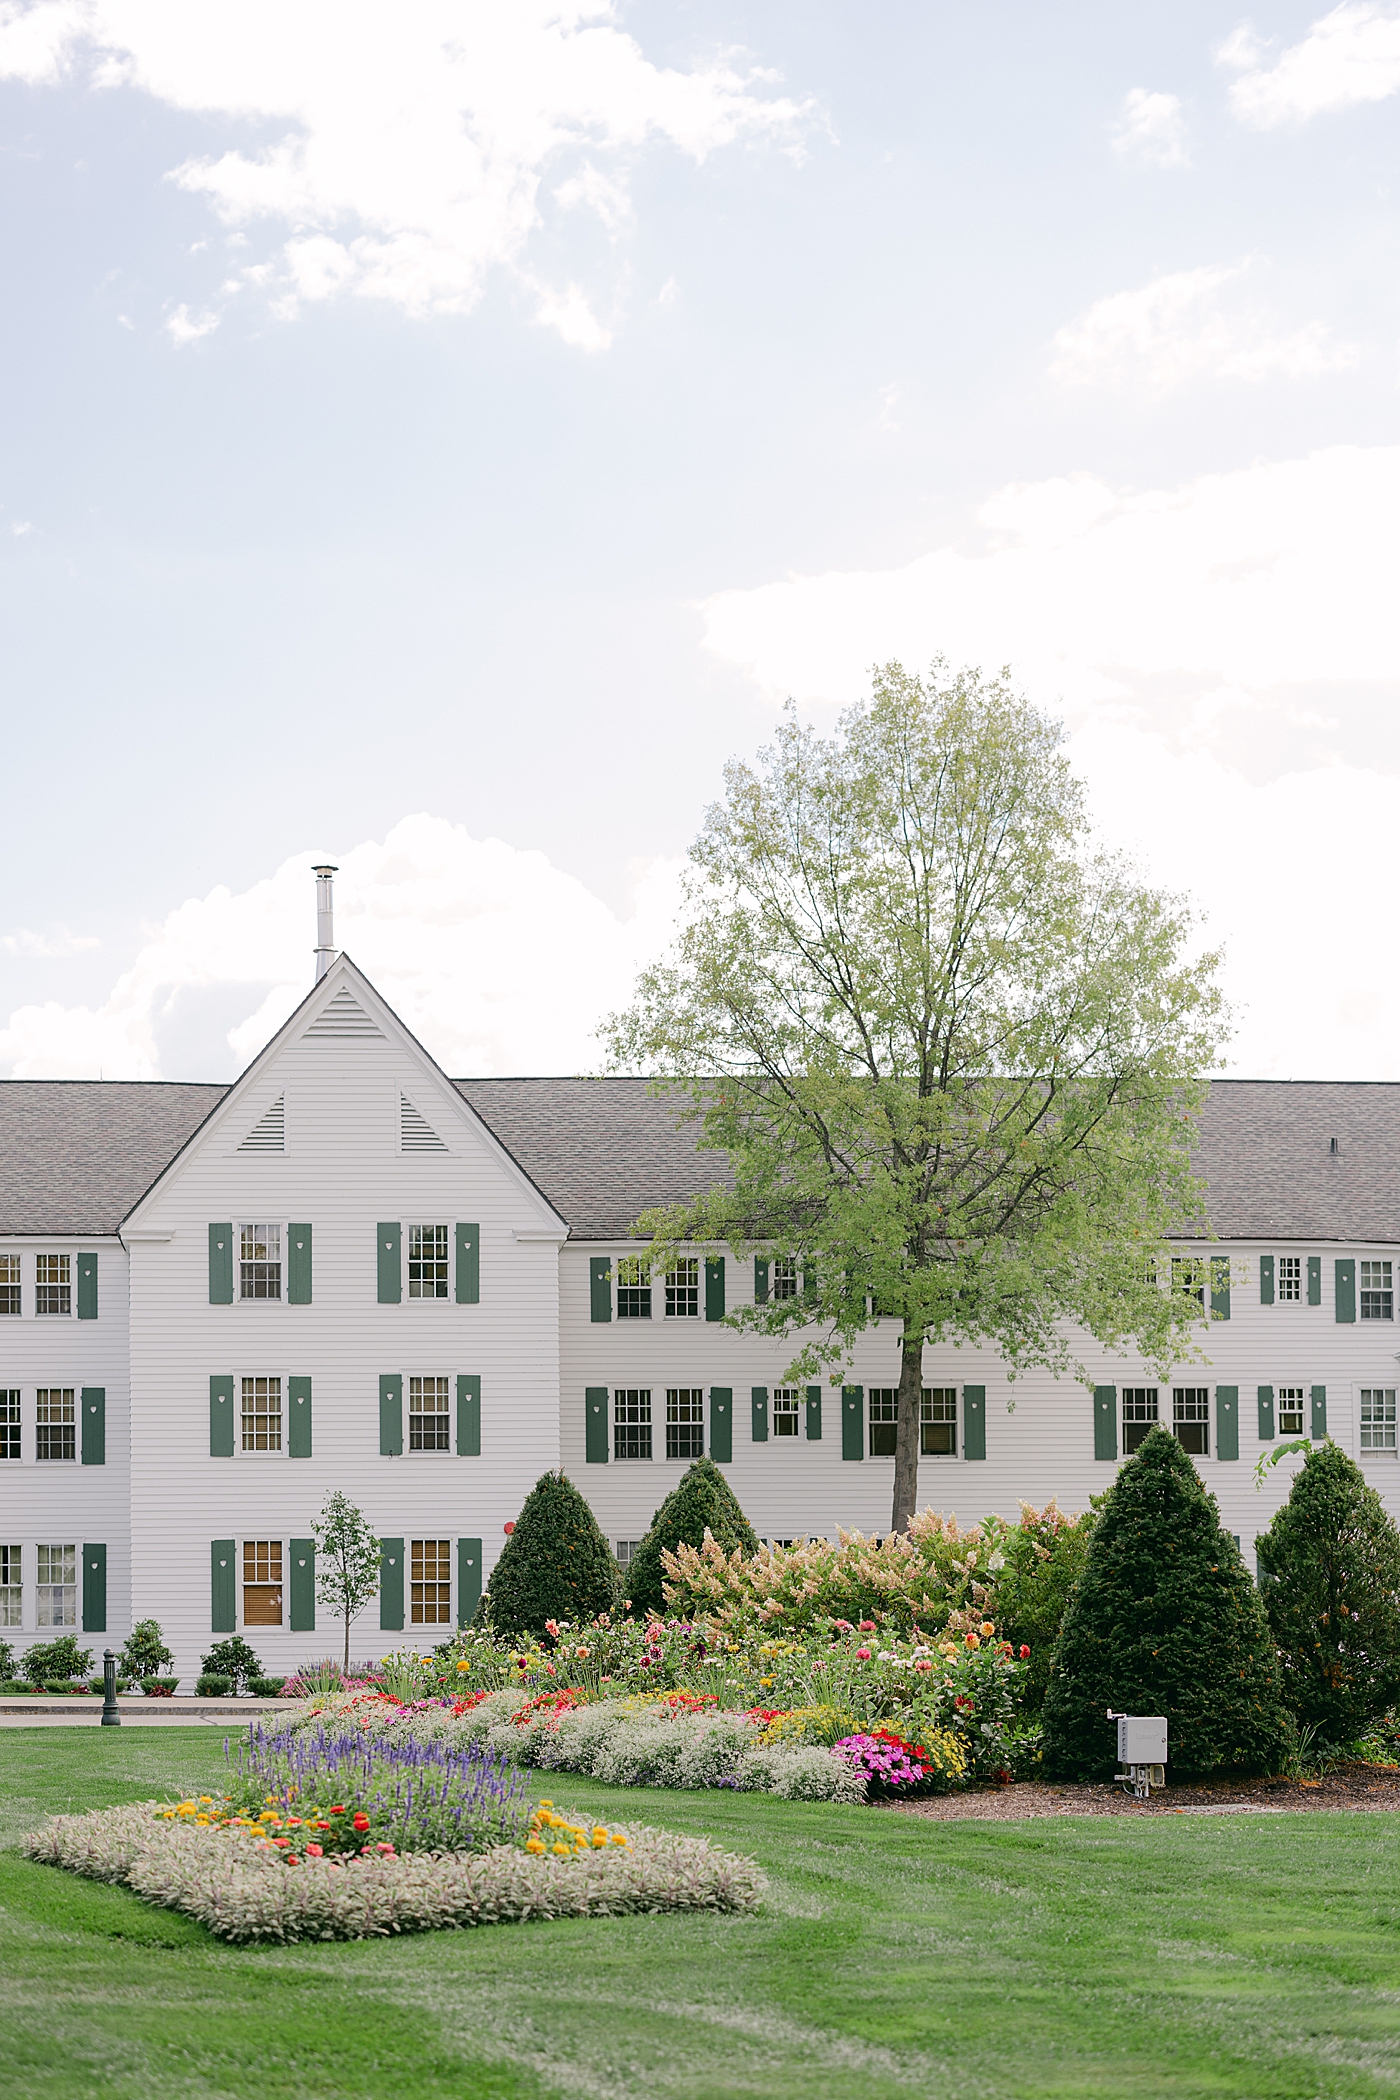 Location image of the front of Sagamore country club with floral landscaping during their Sagamore Wedding | Image by Hope Helmuth Photography